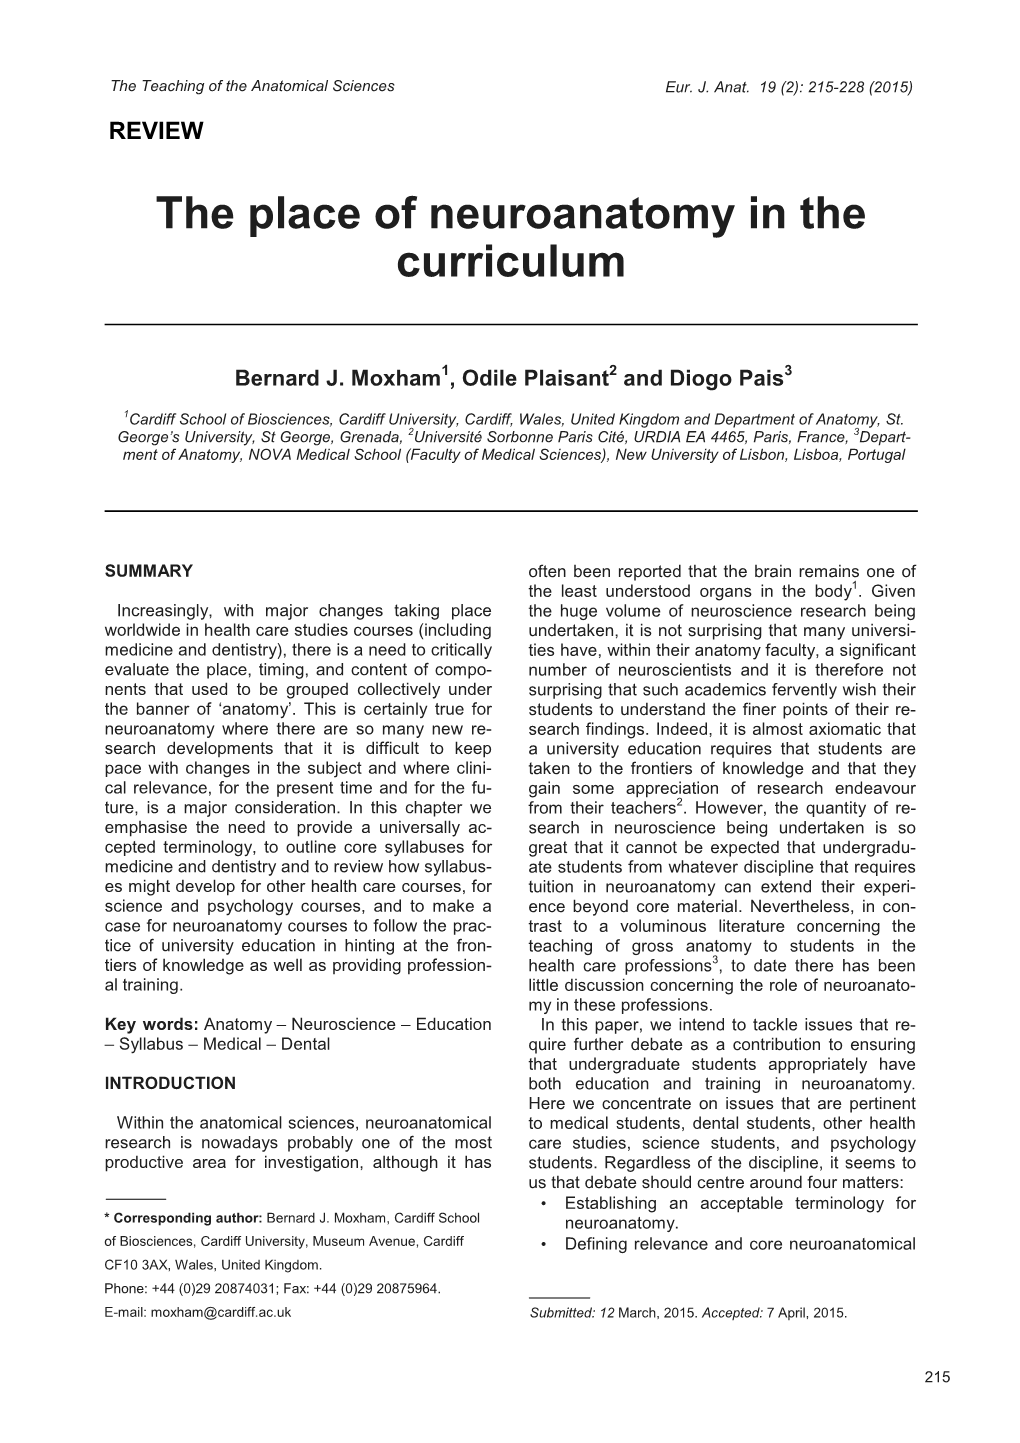 The Place of Neuroanatomy in the Curriculum